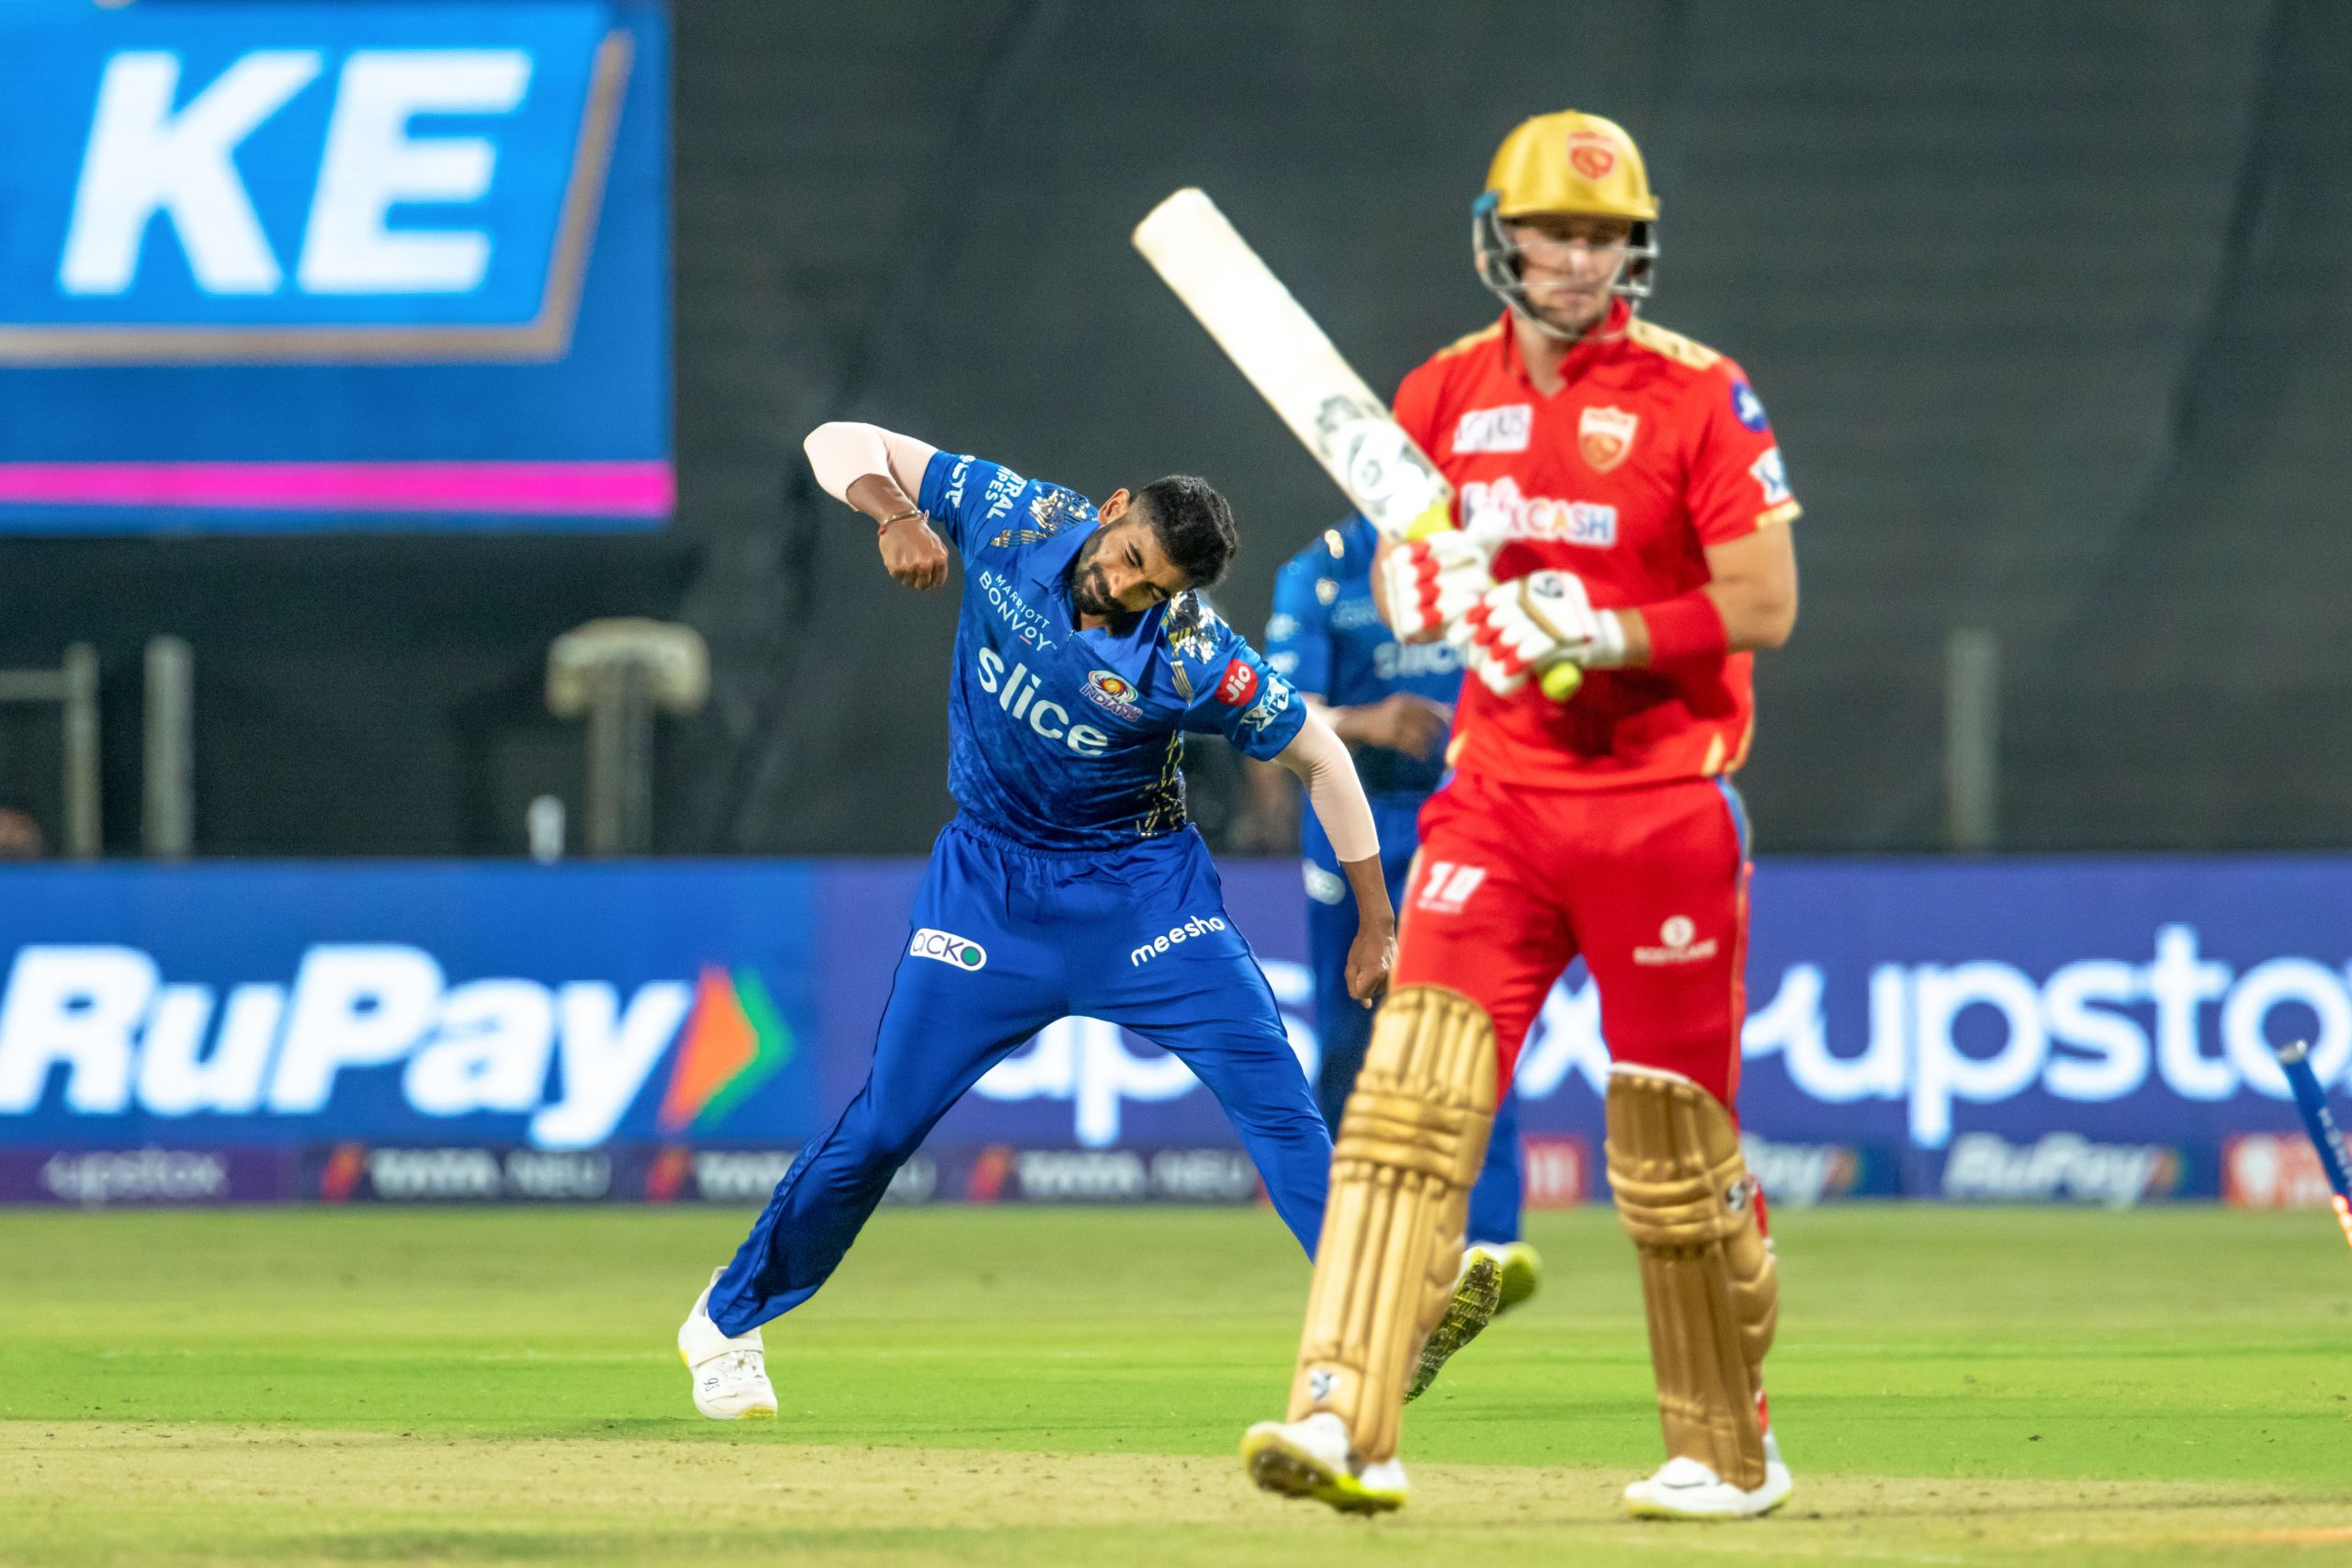 Five in a row: Mumbai Indians in trouble after defeat vs Punjab Kings